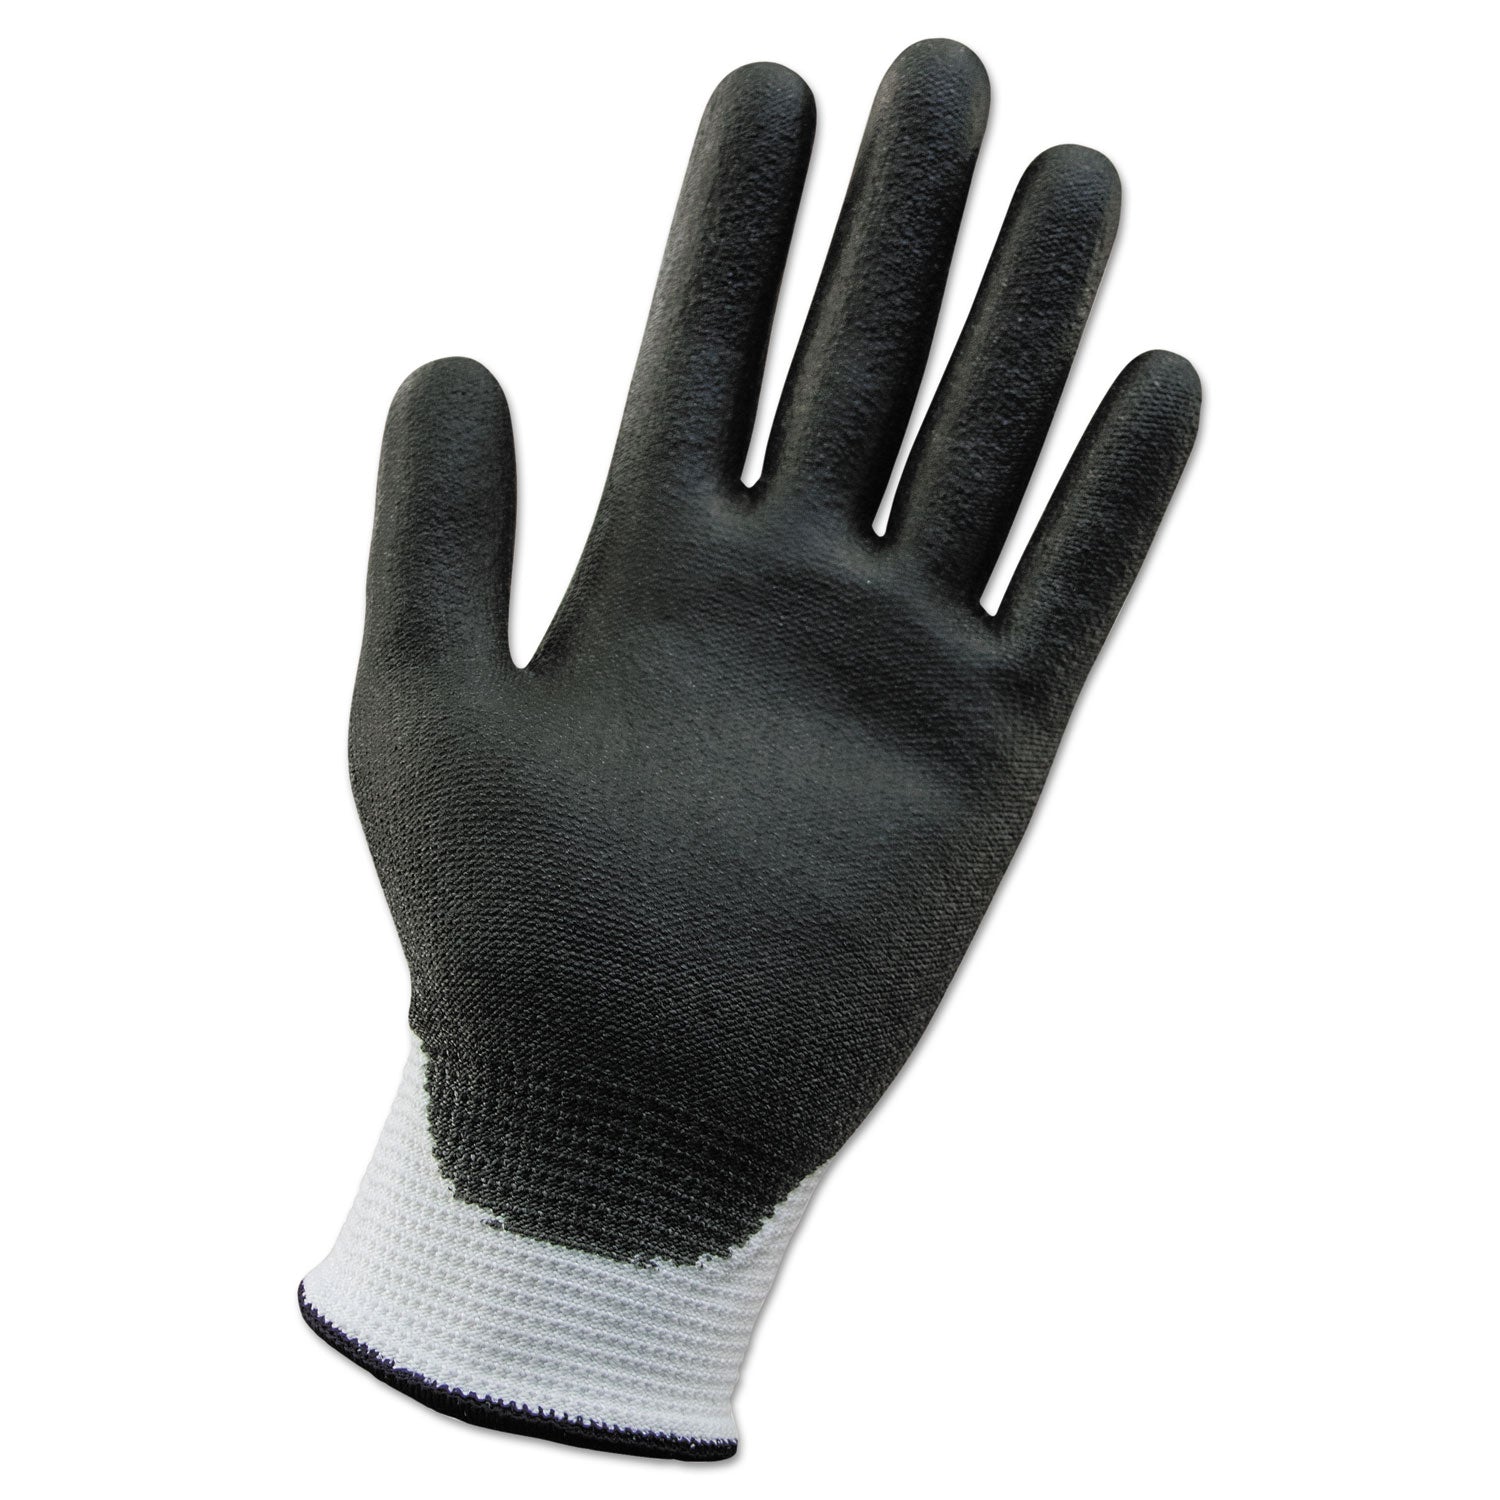 g60-ansi-level-2-cut-resistant-gloves-220-mm-length-small-white-black-12-pairs_kcc38689 - 1